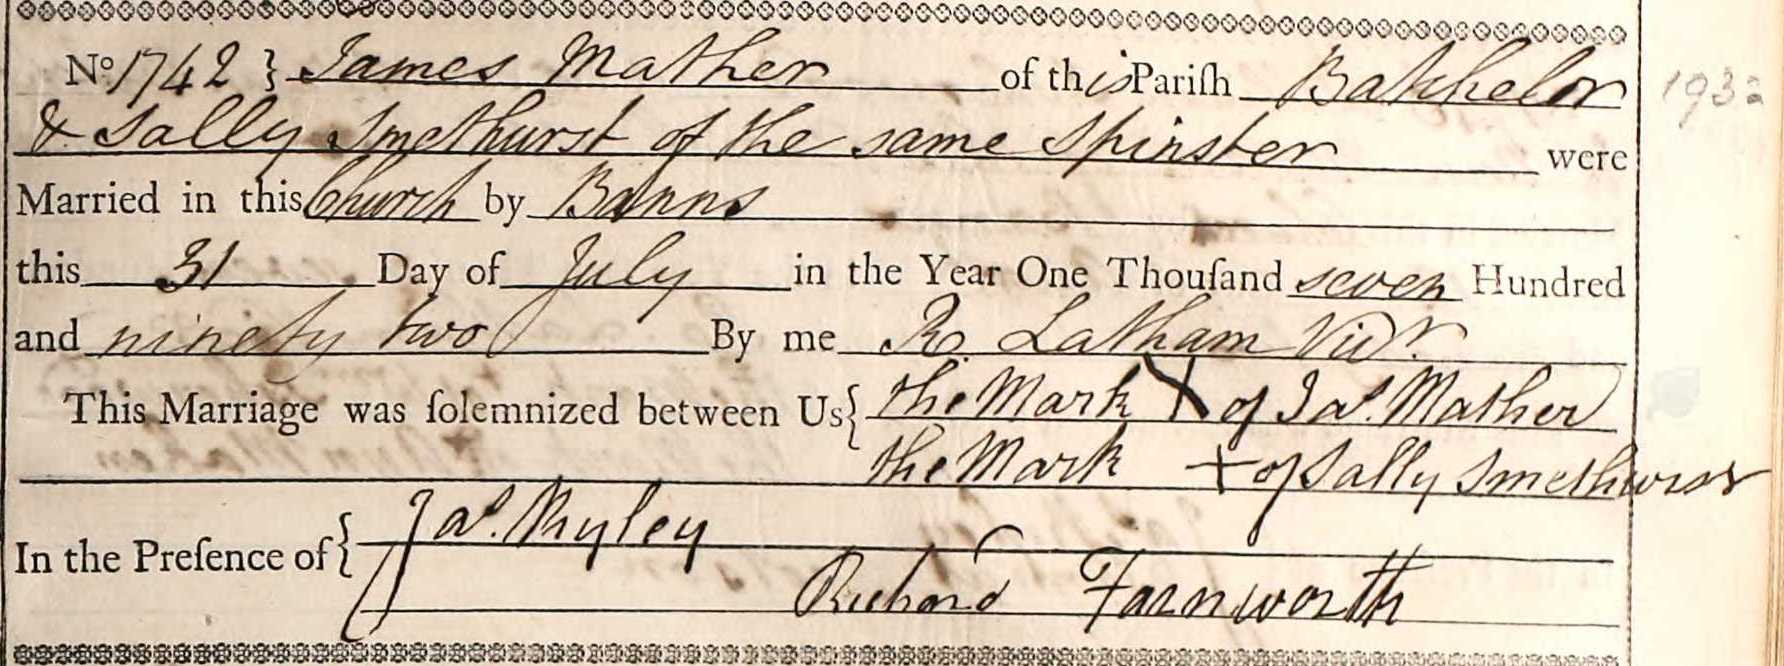 Taken on July 31st, 1792 and sourced from Certificate - Marriage.